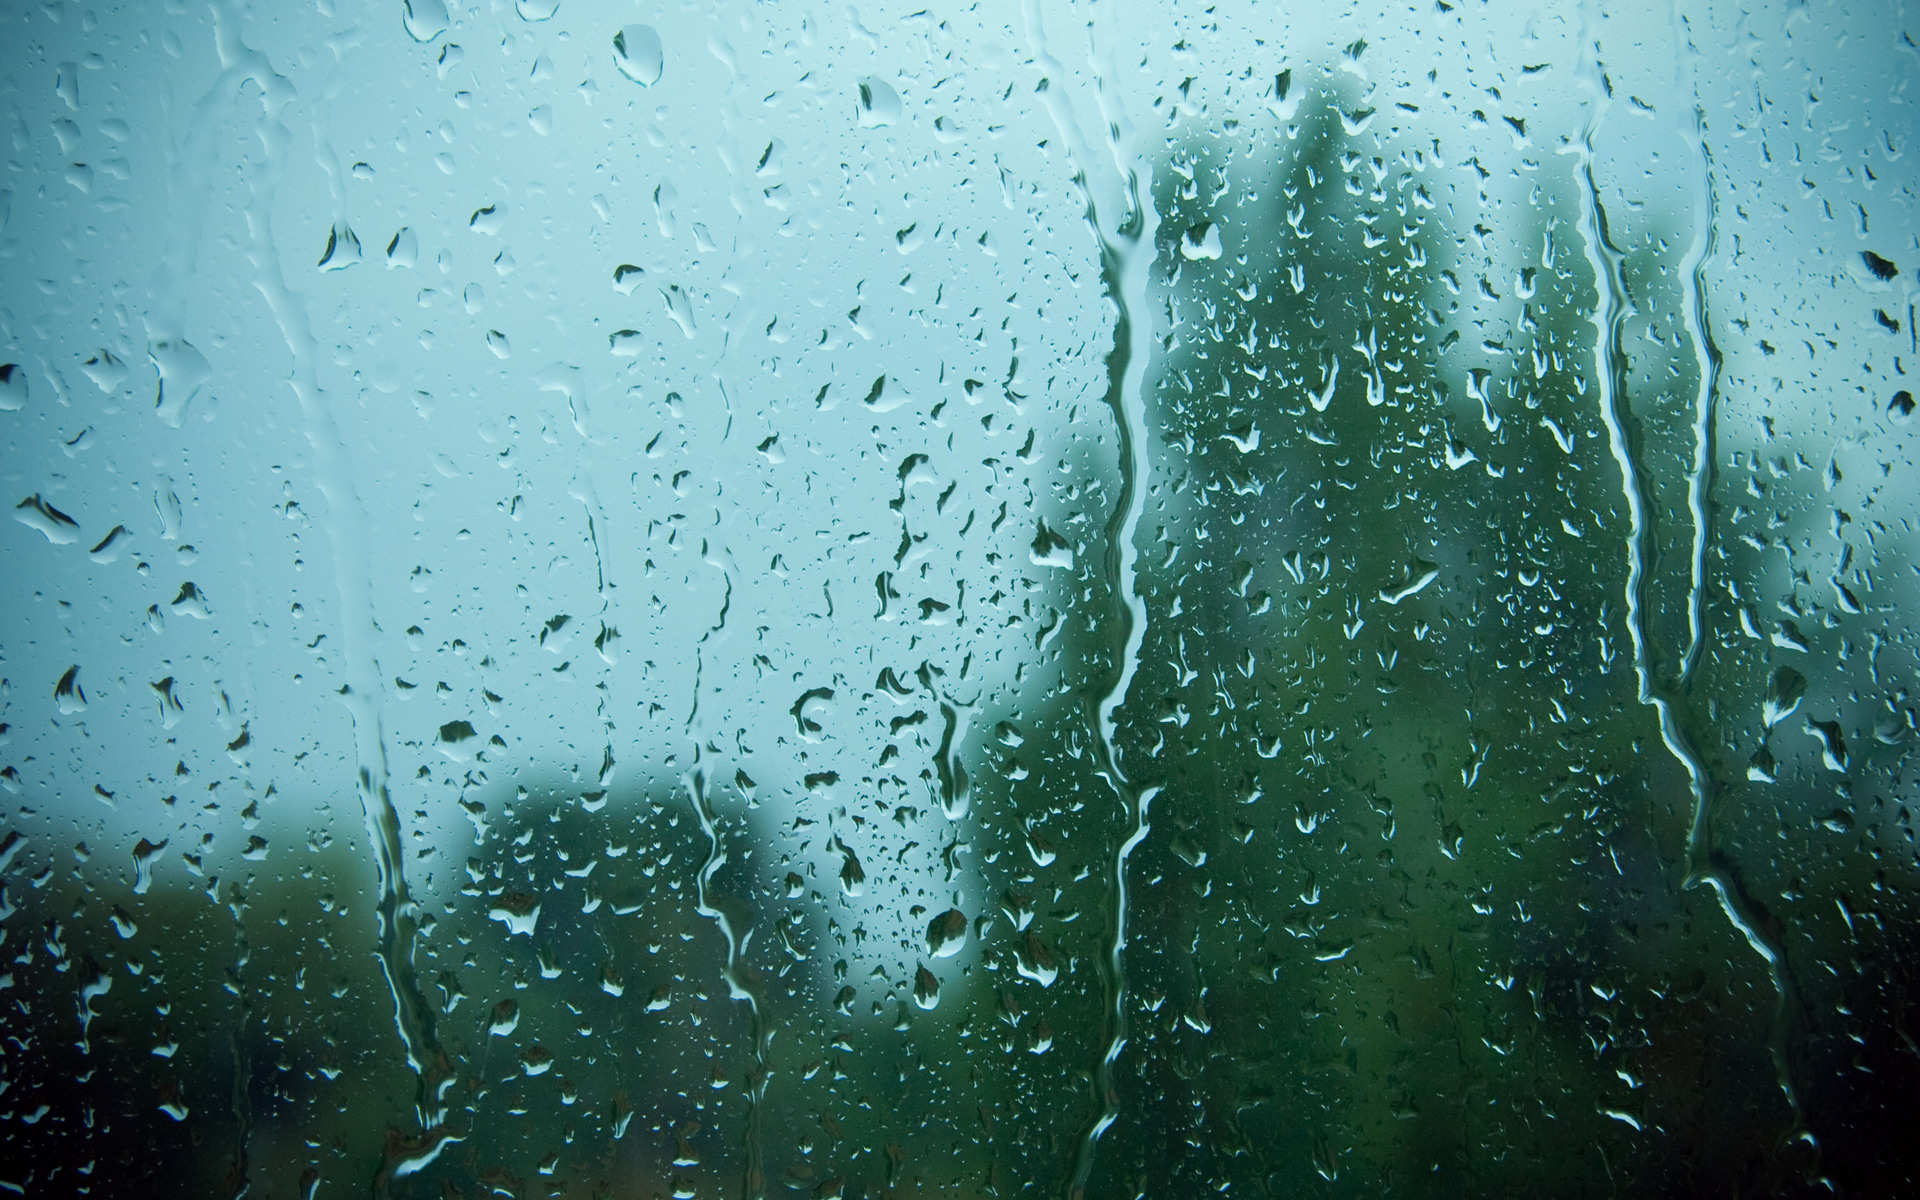 rain on window hd wallpaper you are viewing the abstract wallpaper